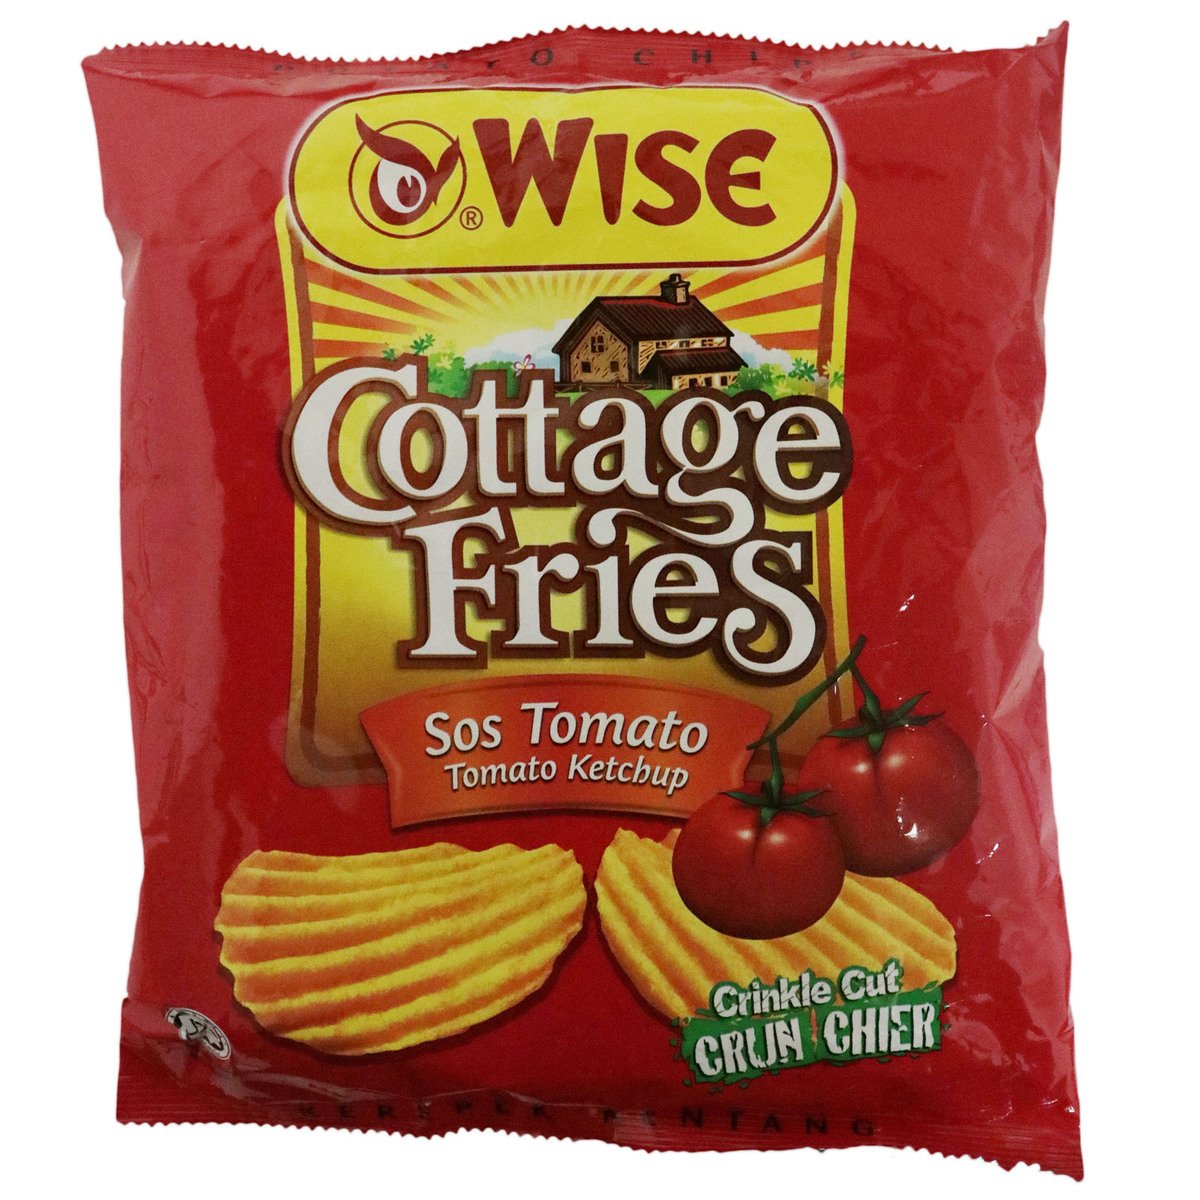 Wise Cottage Fries Tomato Ketchup 60g